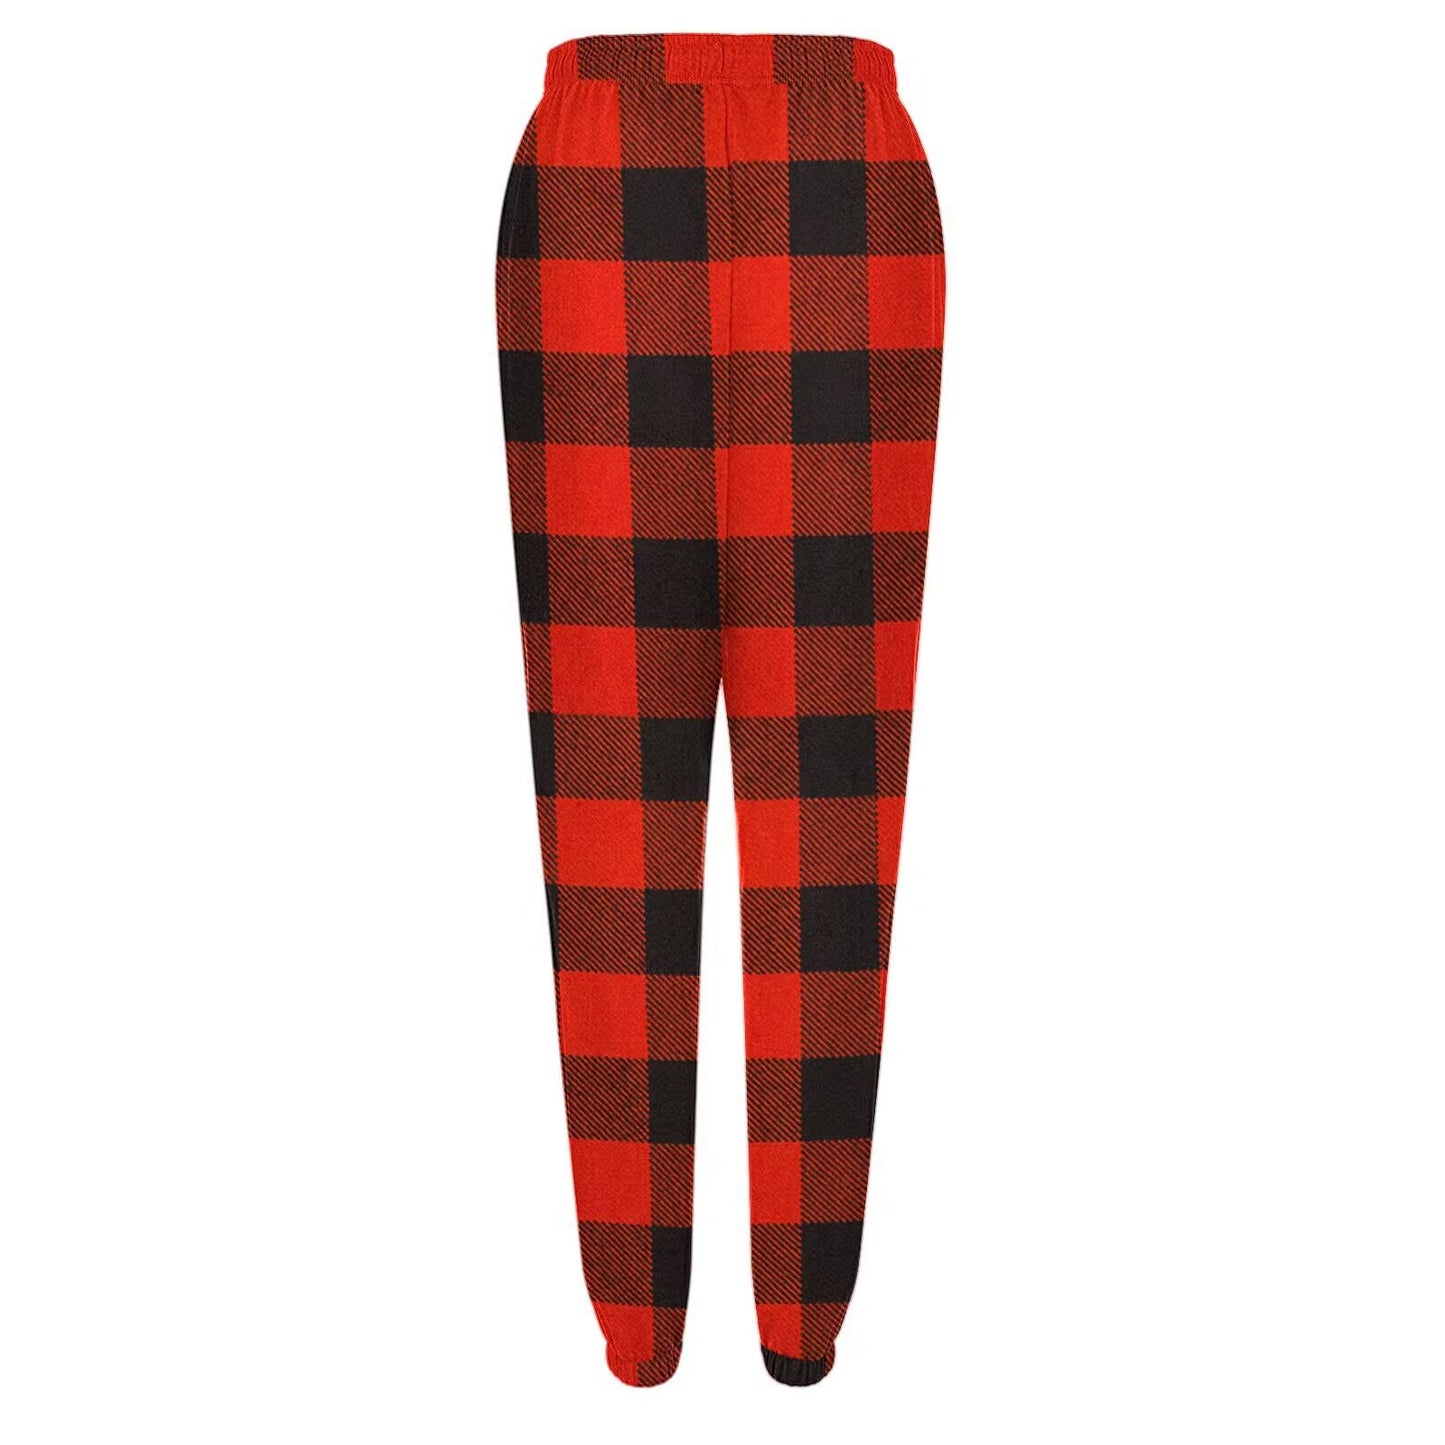 Red Plaid Printed Elastic Waistband Casual Pants with Pockets